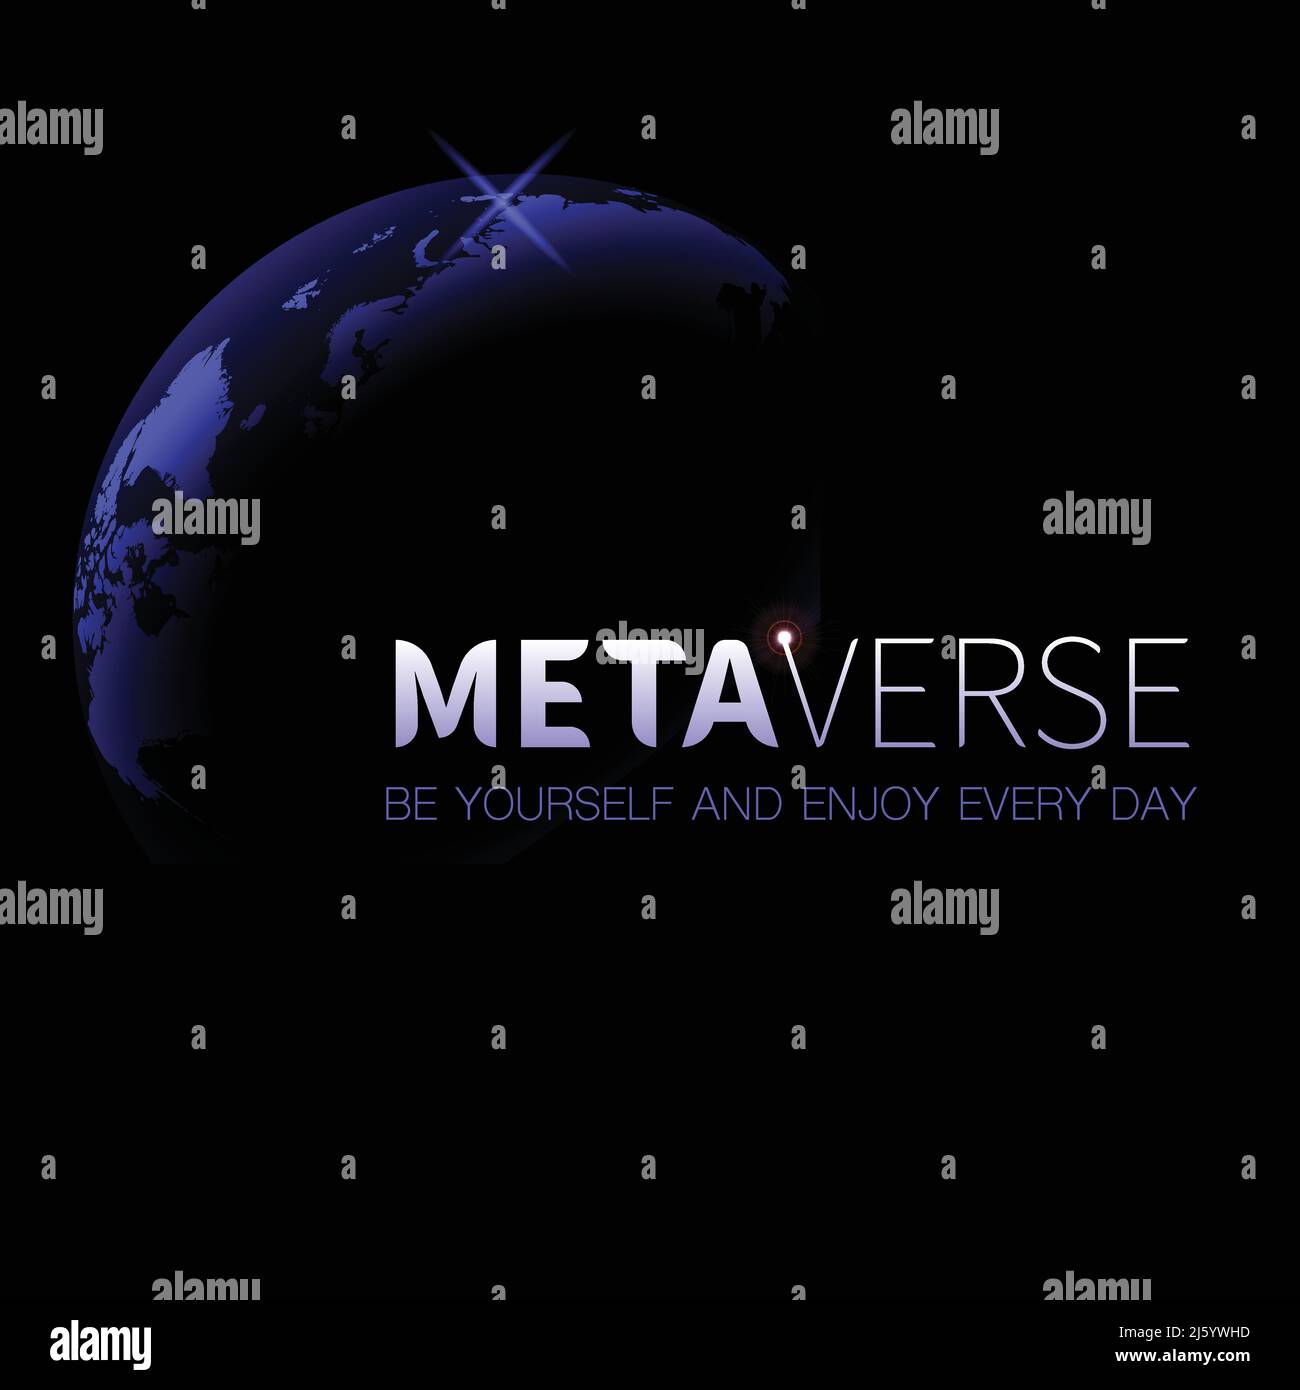 Metaverse text space background Stock Vector